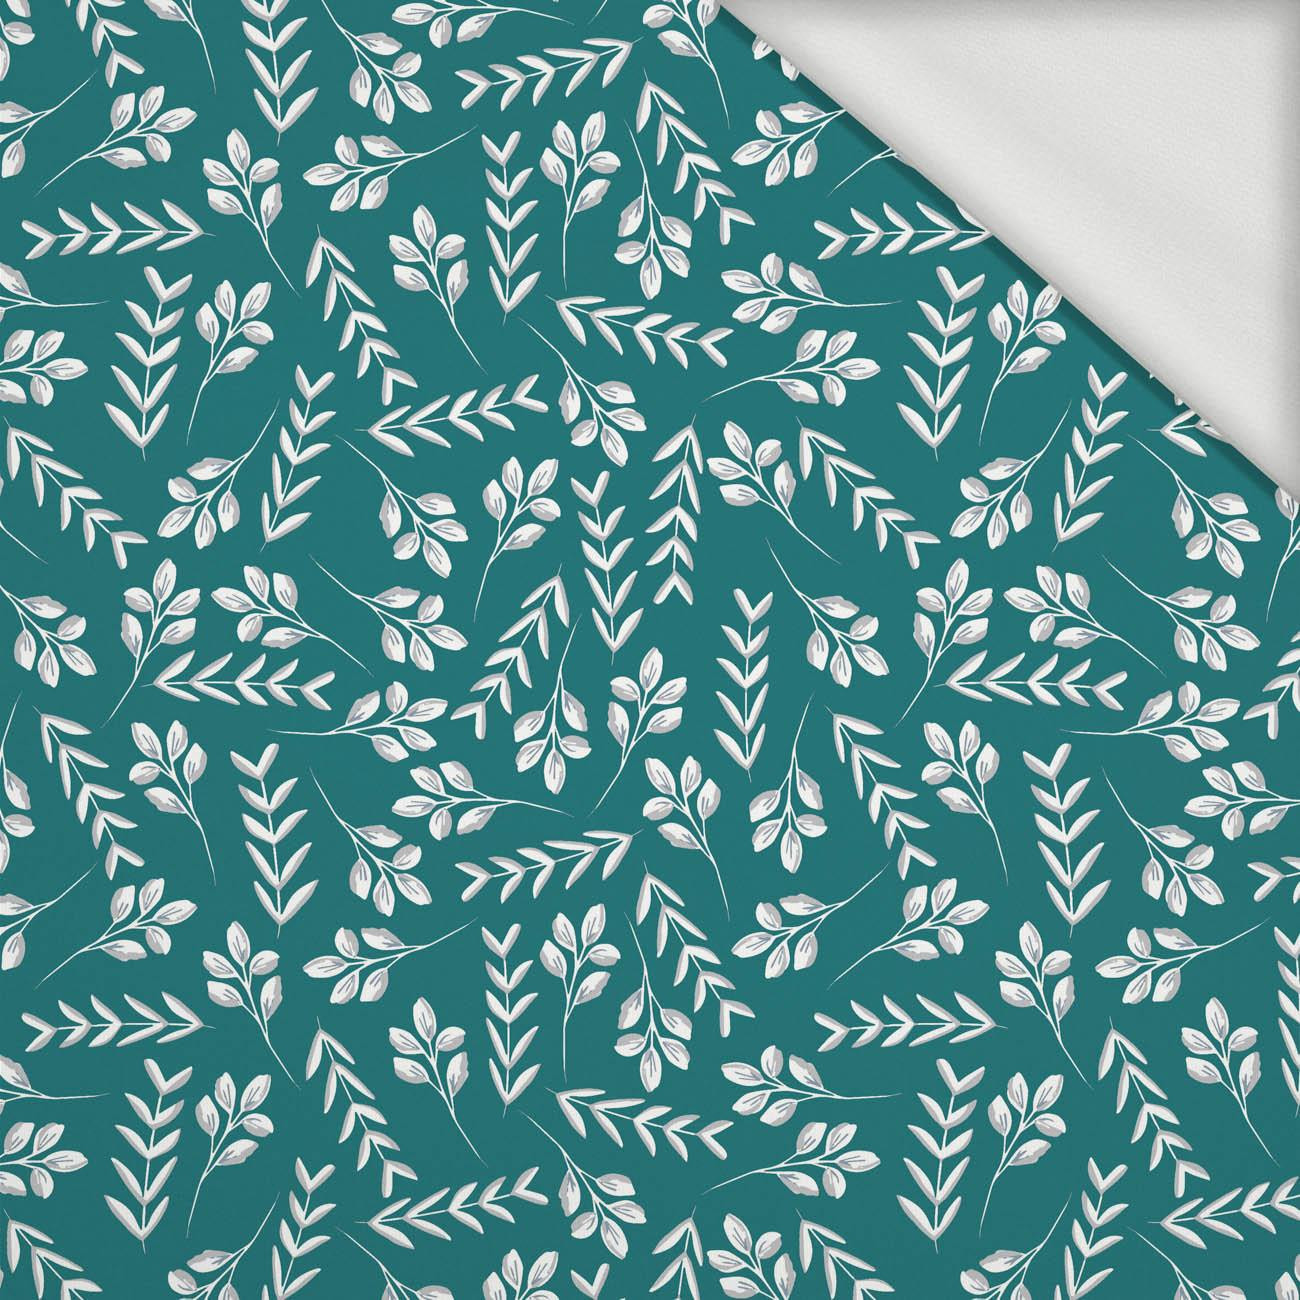 SMALL LEAVES pat. 2 / emerald - looped knit fabric